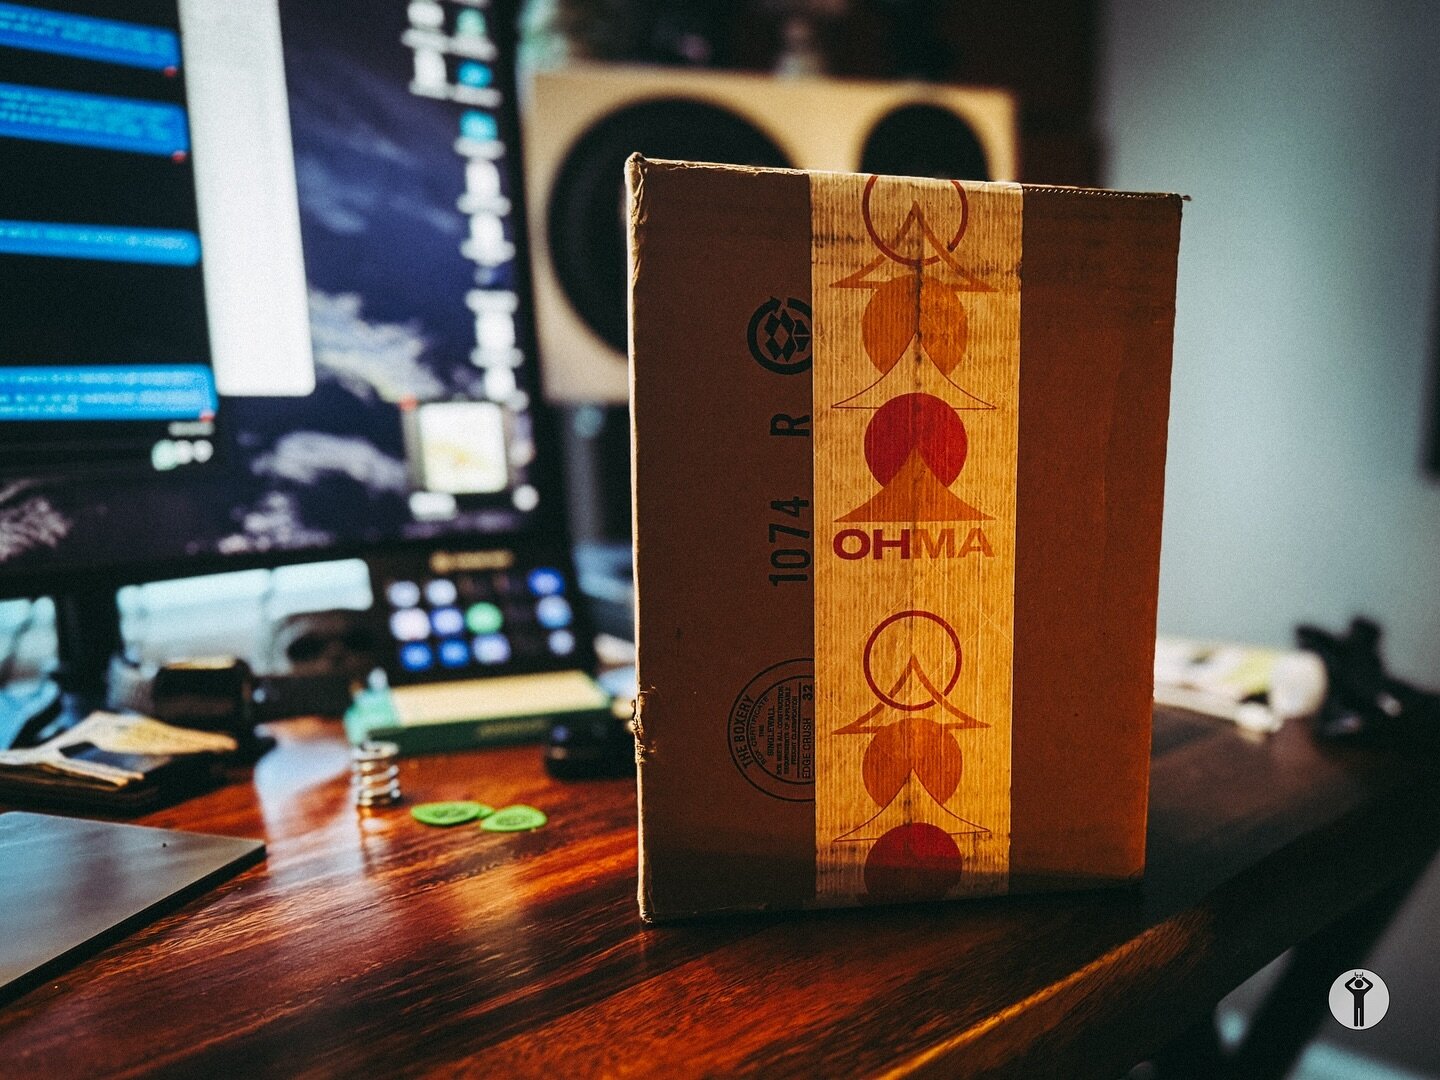 This box of an amazing ribbon from @ohmaworld showed up today.  I am heads down with day job stuff and a weekend get away with the wife.  But I cannot me more excited to try this mic out next week and hope this captures some sounds I&rsquo;ve had in 